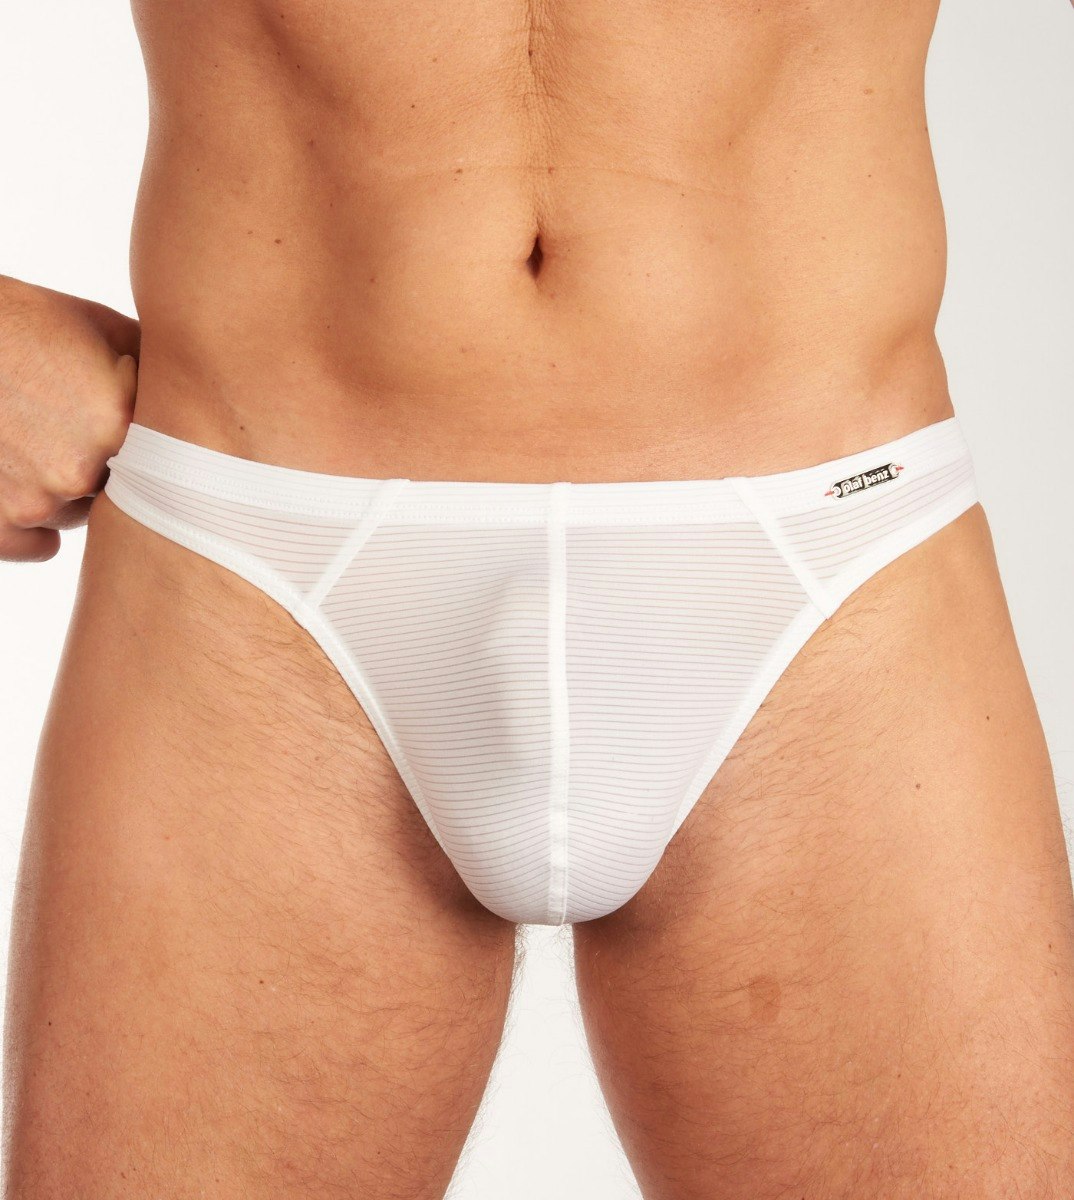 Olaf Benz Red 0965 Ministring Sheer Thong White 1-06022/1000 at